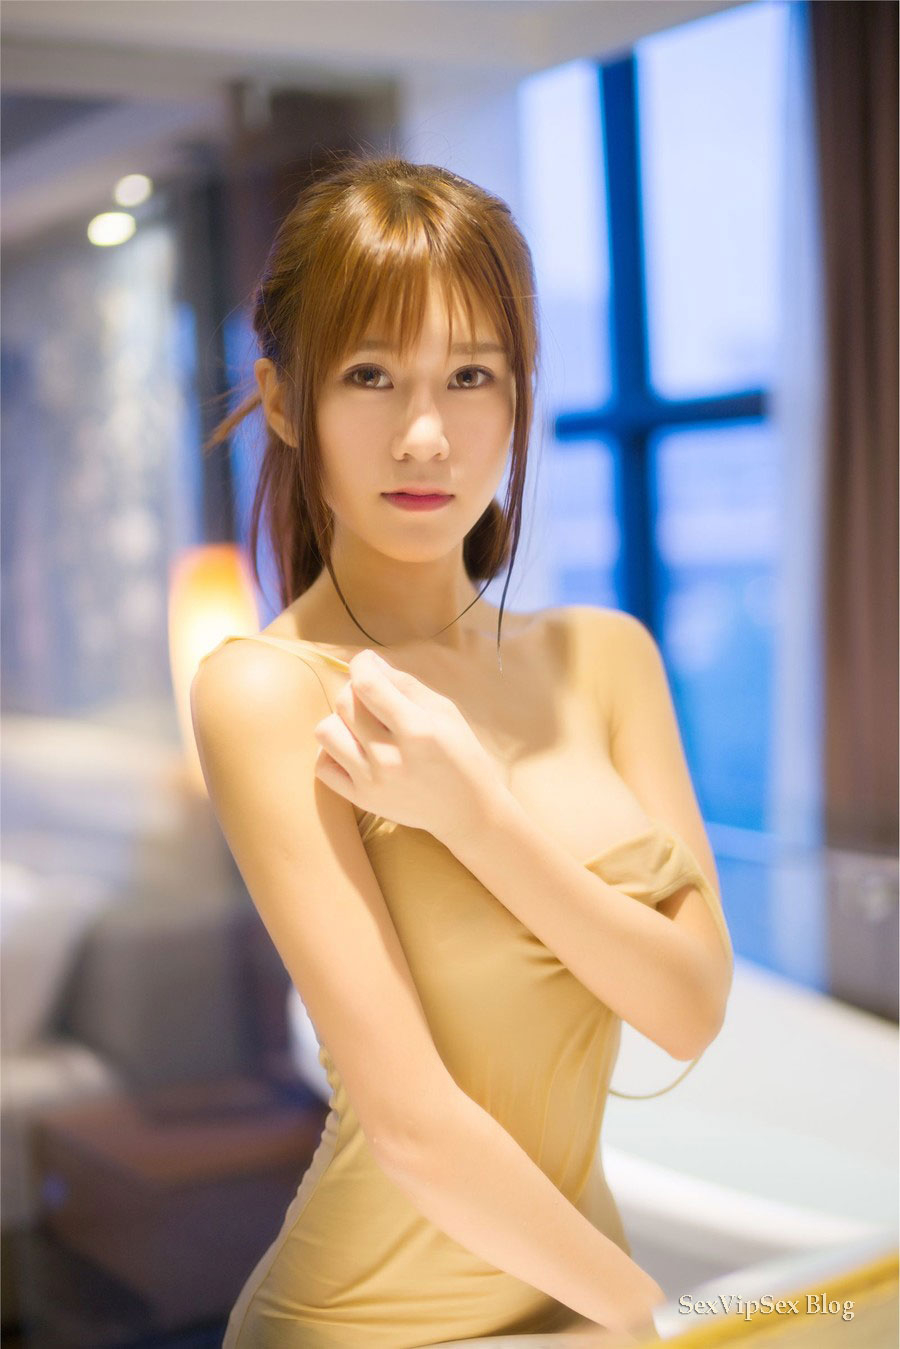 Chinese big boobs gallery, chinese women big tits nude ...